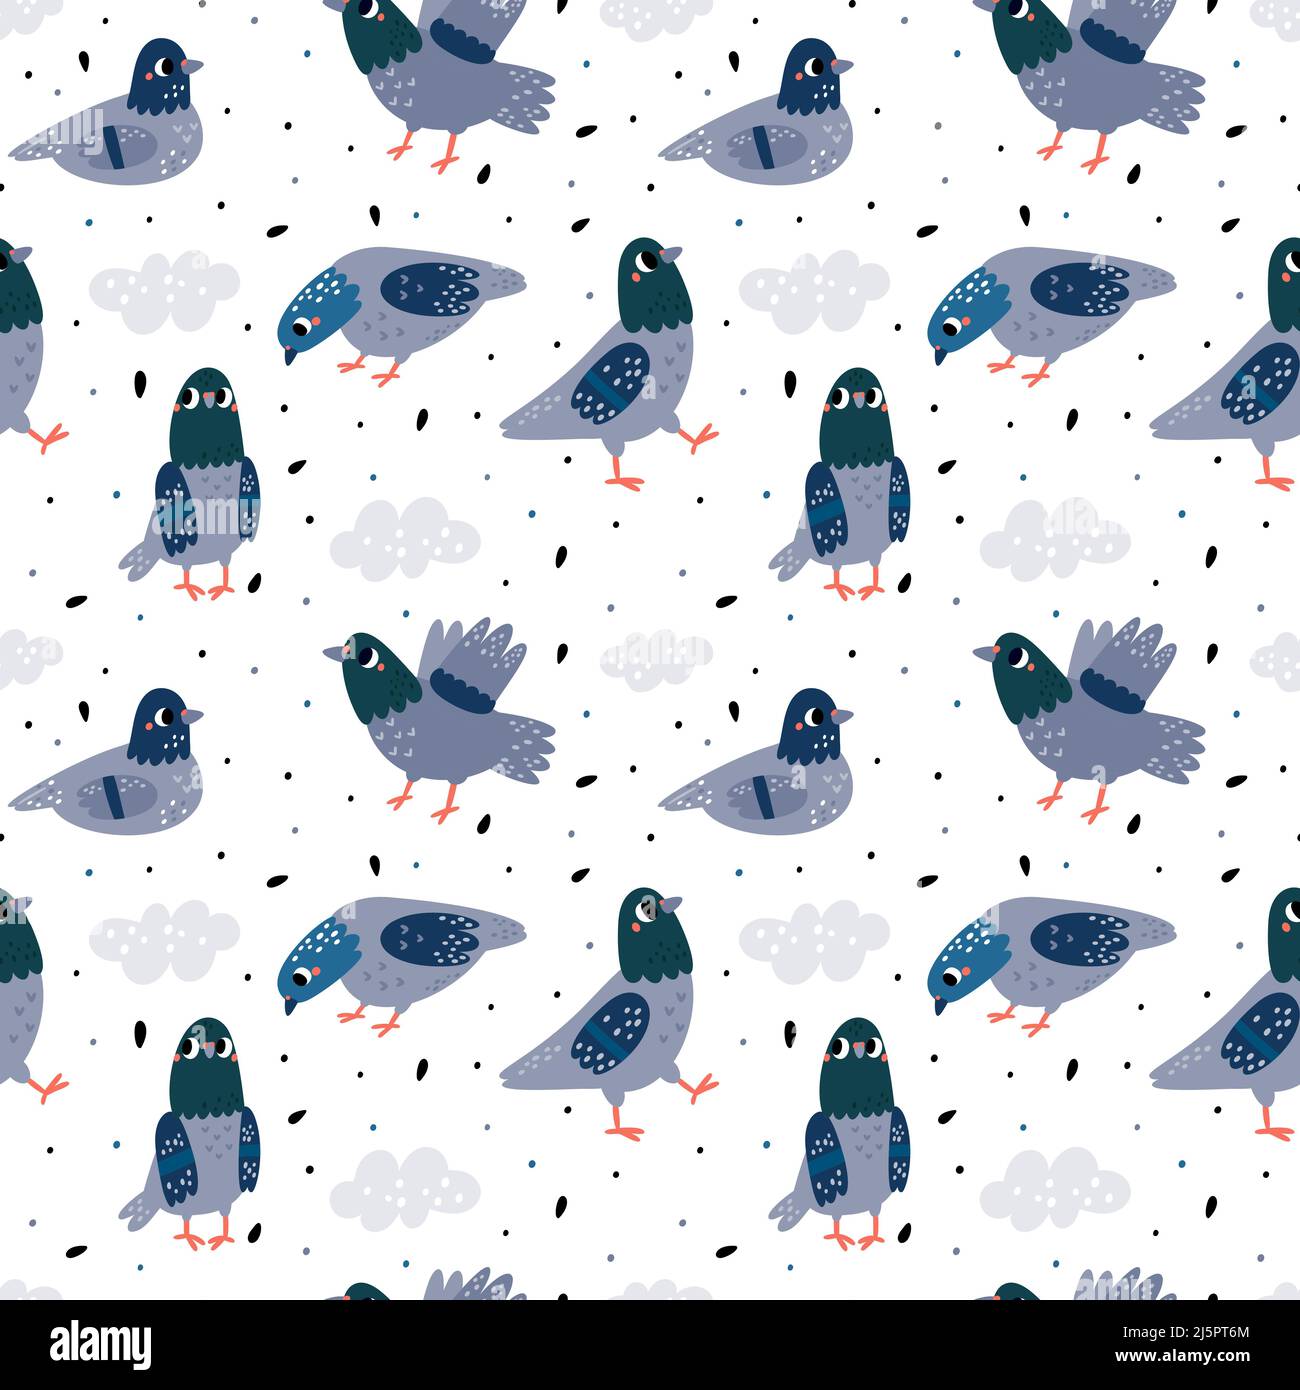 Pigeons seamless pattern. Cute print with doves pecking seeds. Street grey birds in different poses and angles. Urban inhabitants. Avian flock Stock Vector